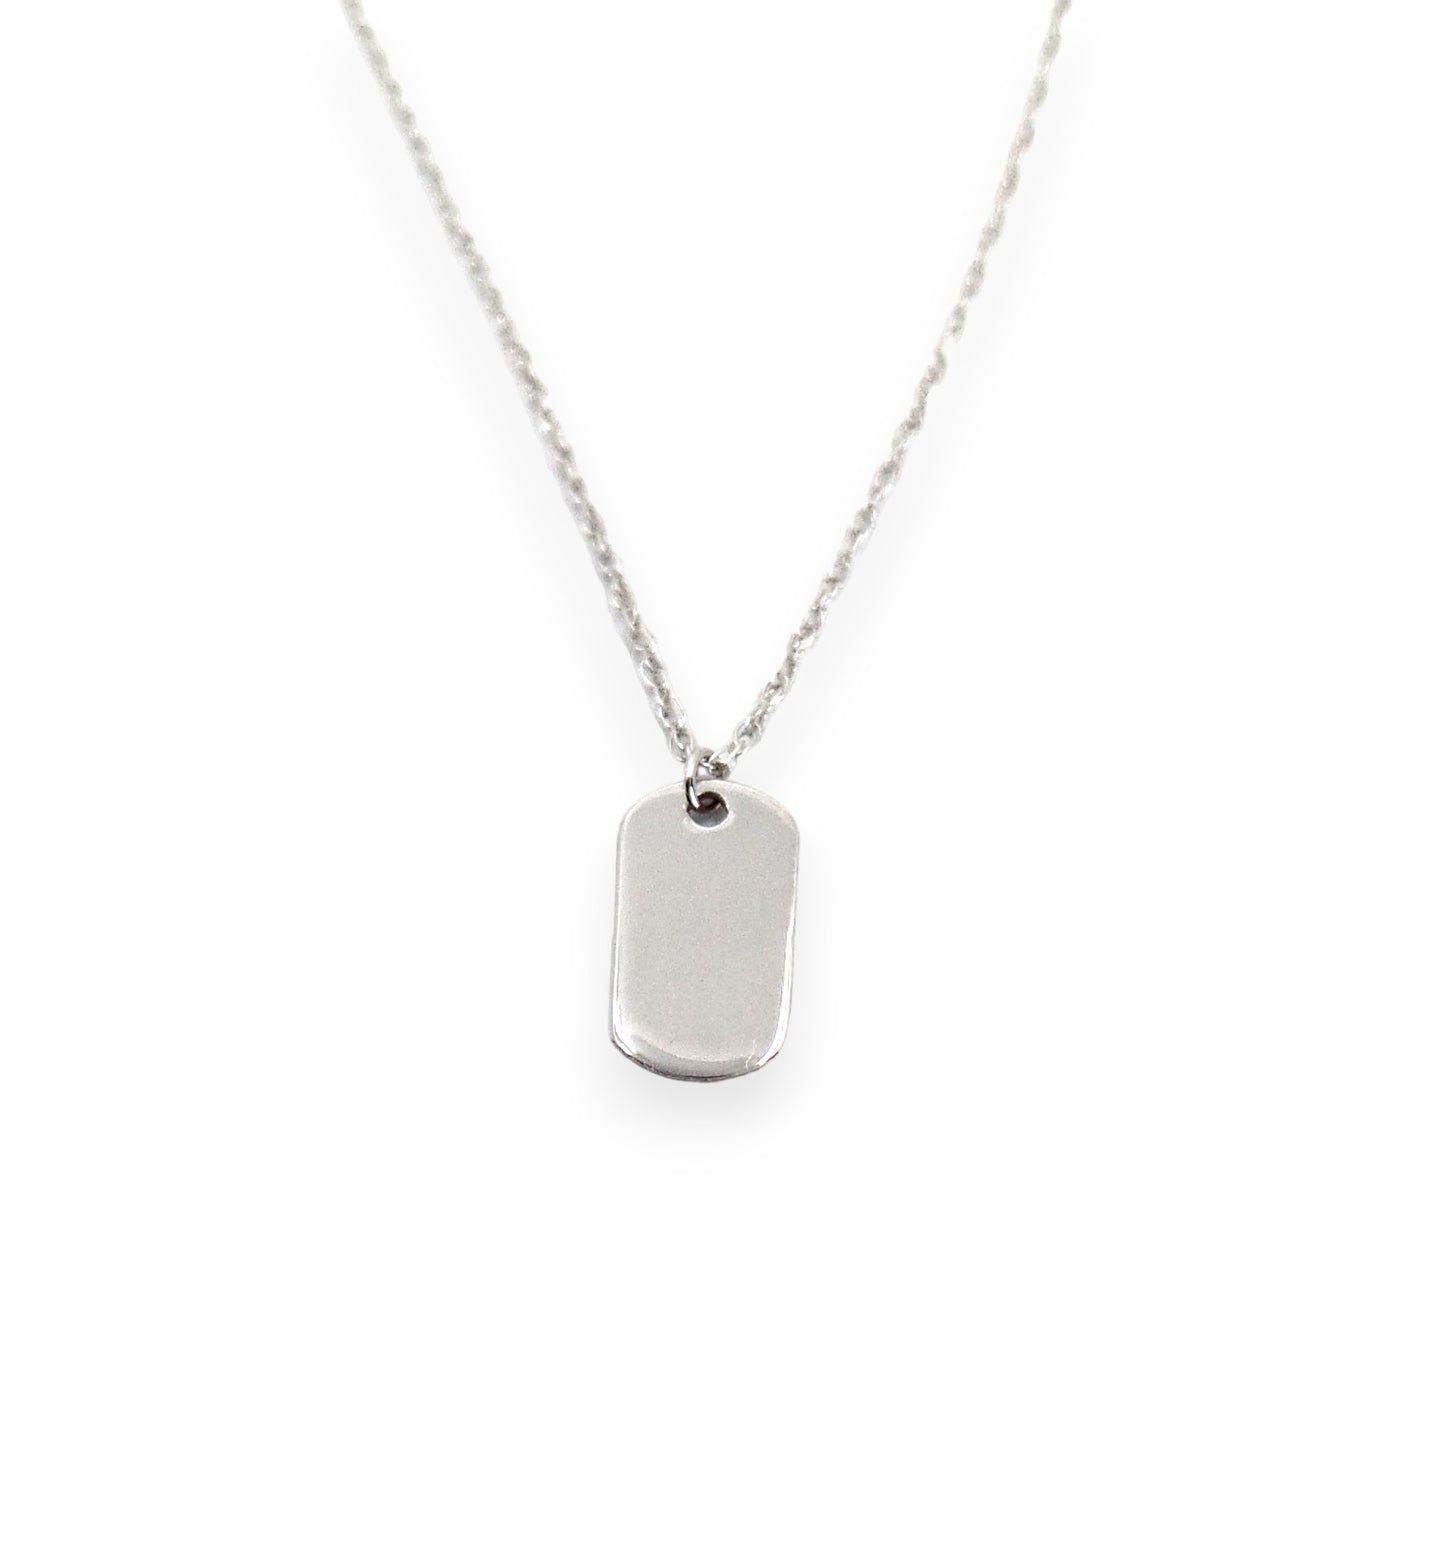 Mini Dog Tag Necklace in White Gold